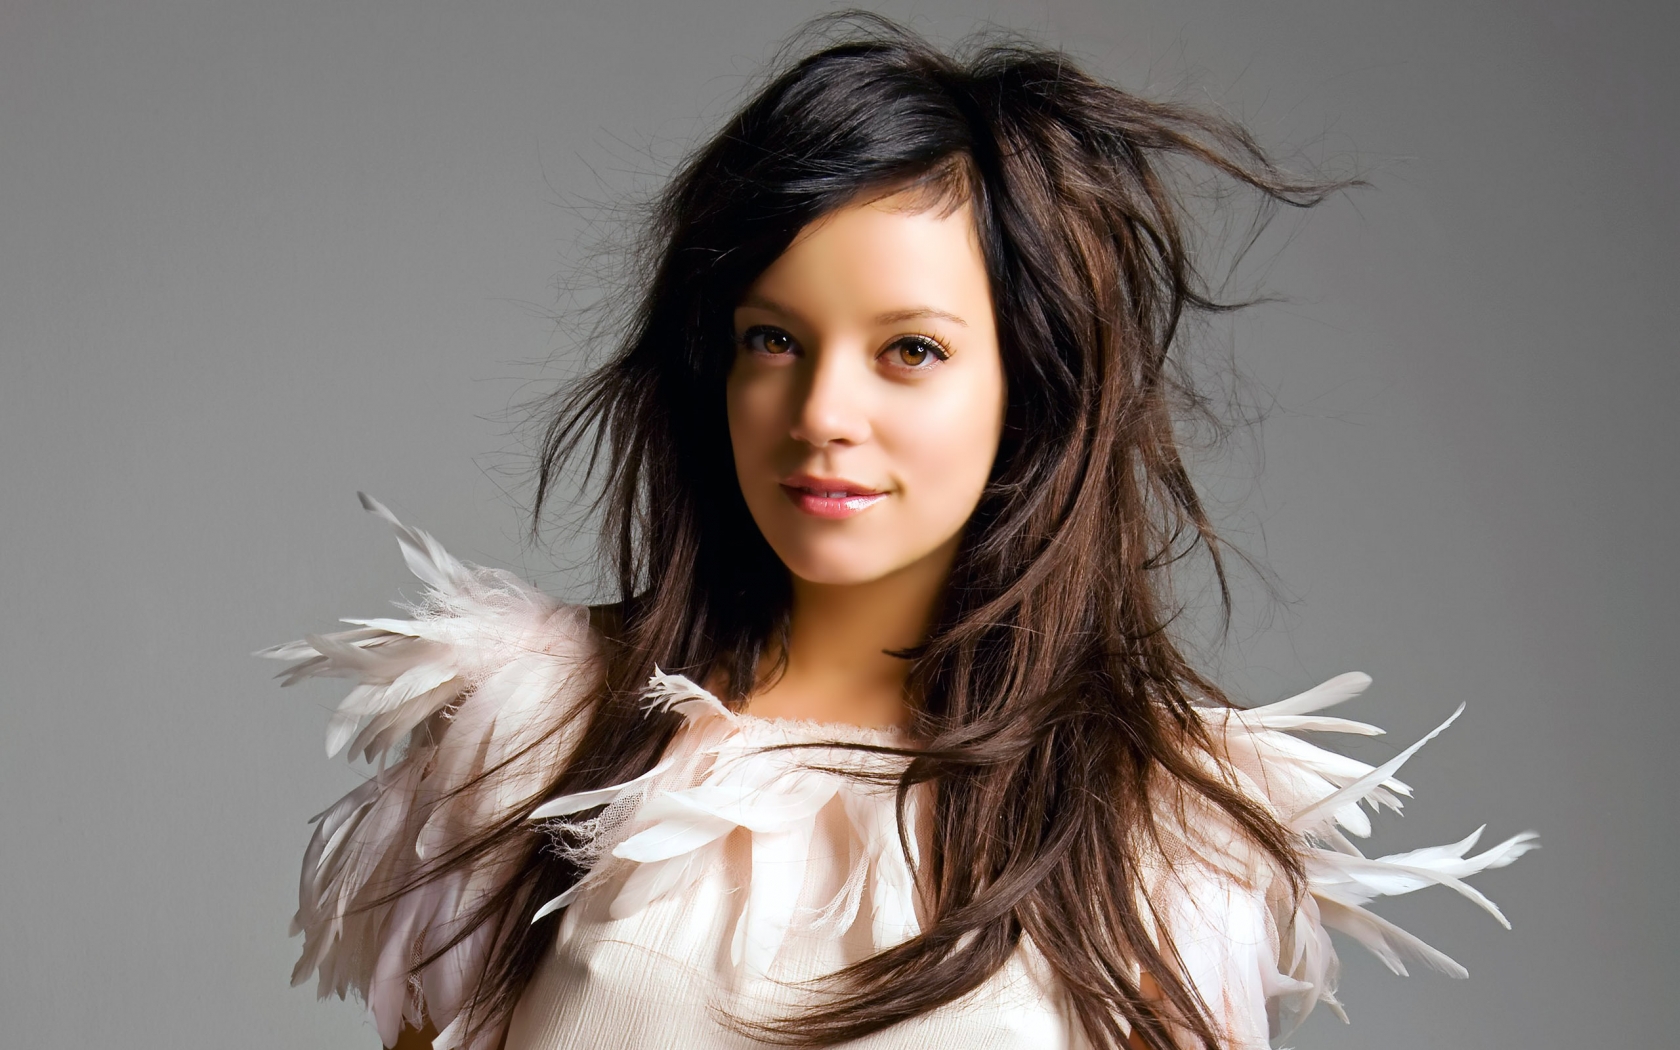 Superb Lily Allen for 1680 x 1050 widescreen resolution